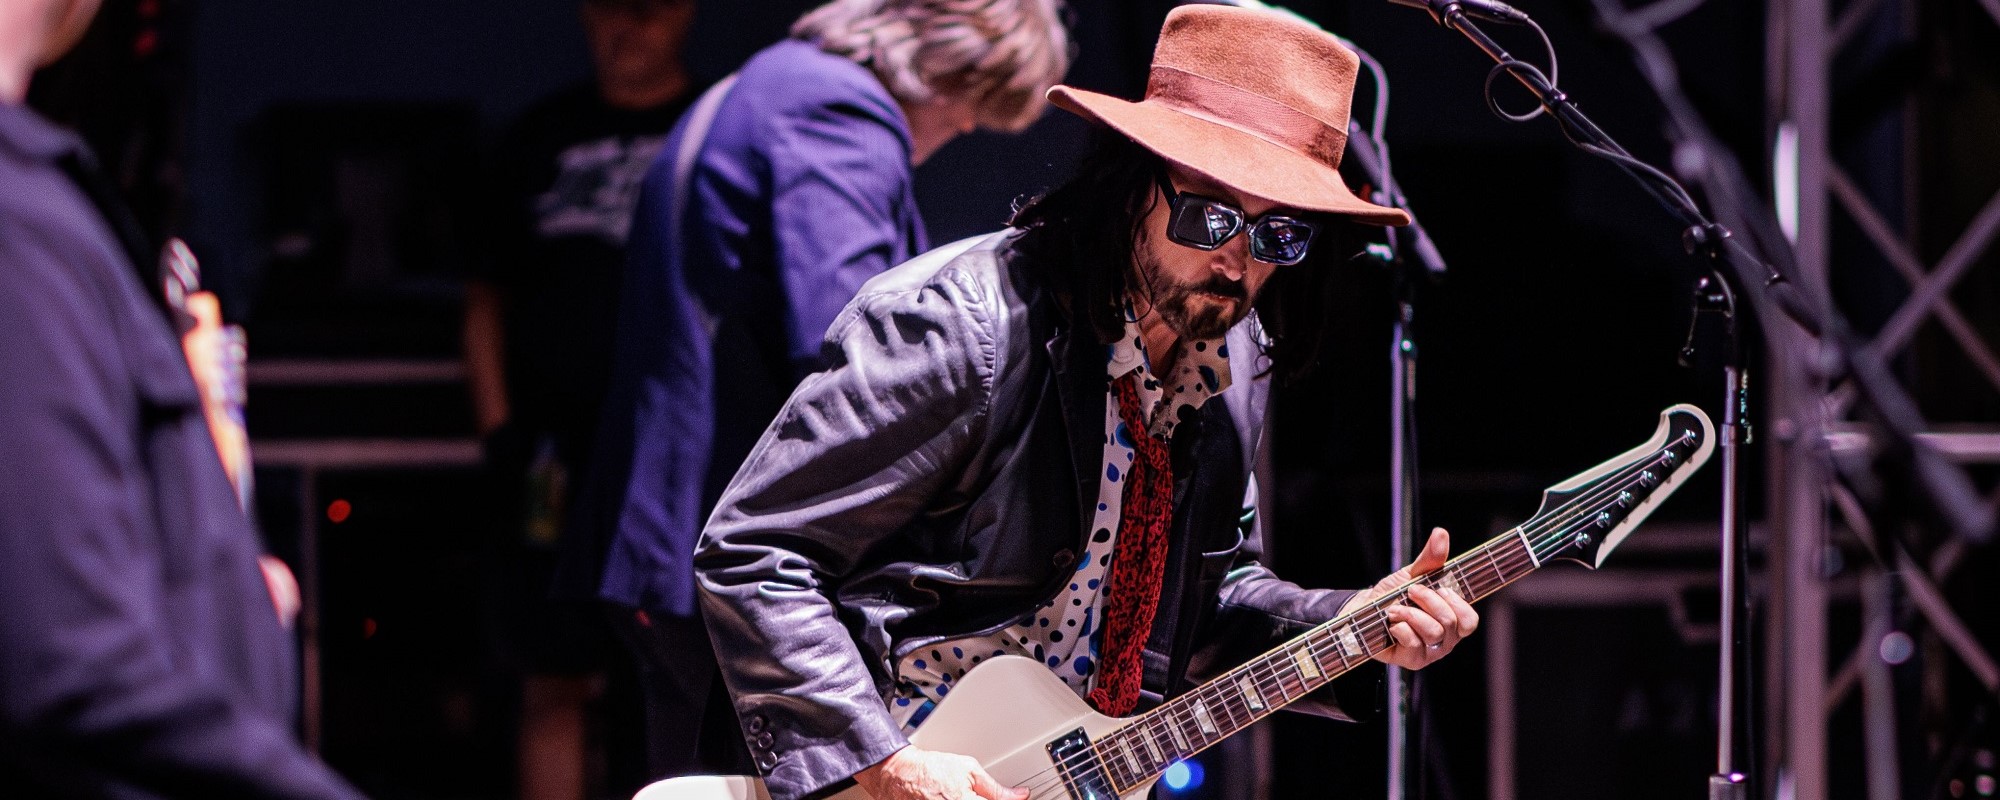 Tom Petty Guitarist Mike Campbell’s Current Band The Dirty Knobs Teaming Up with Lucinda Williams for Joint Tour